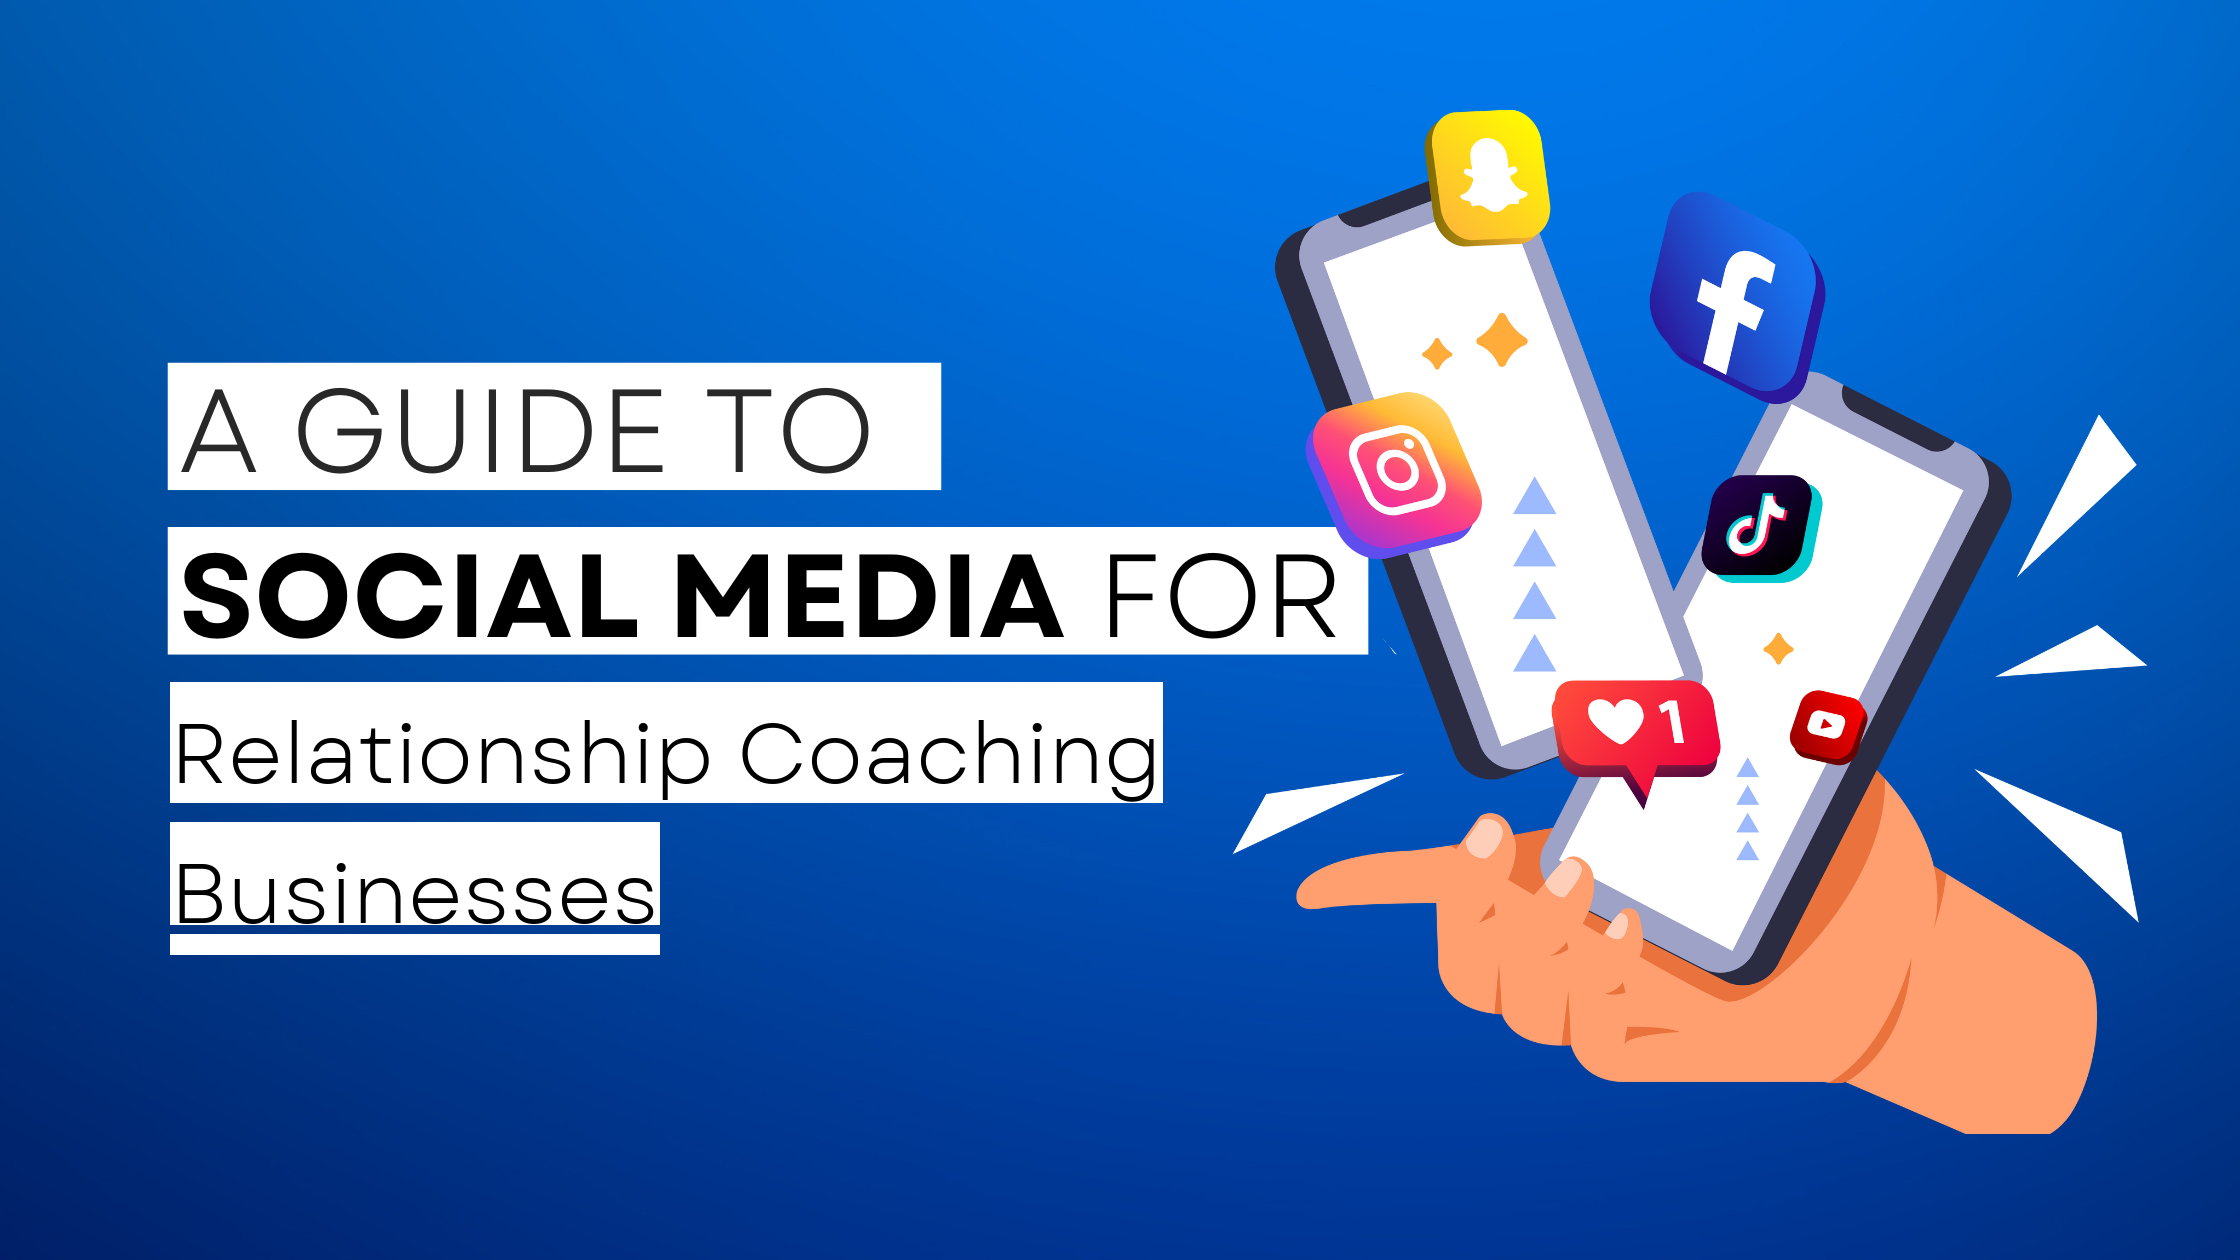 How to start Relationship Coaching  on social media